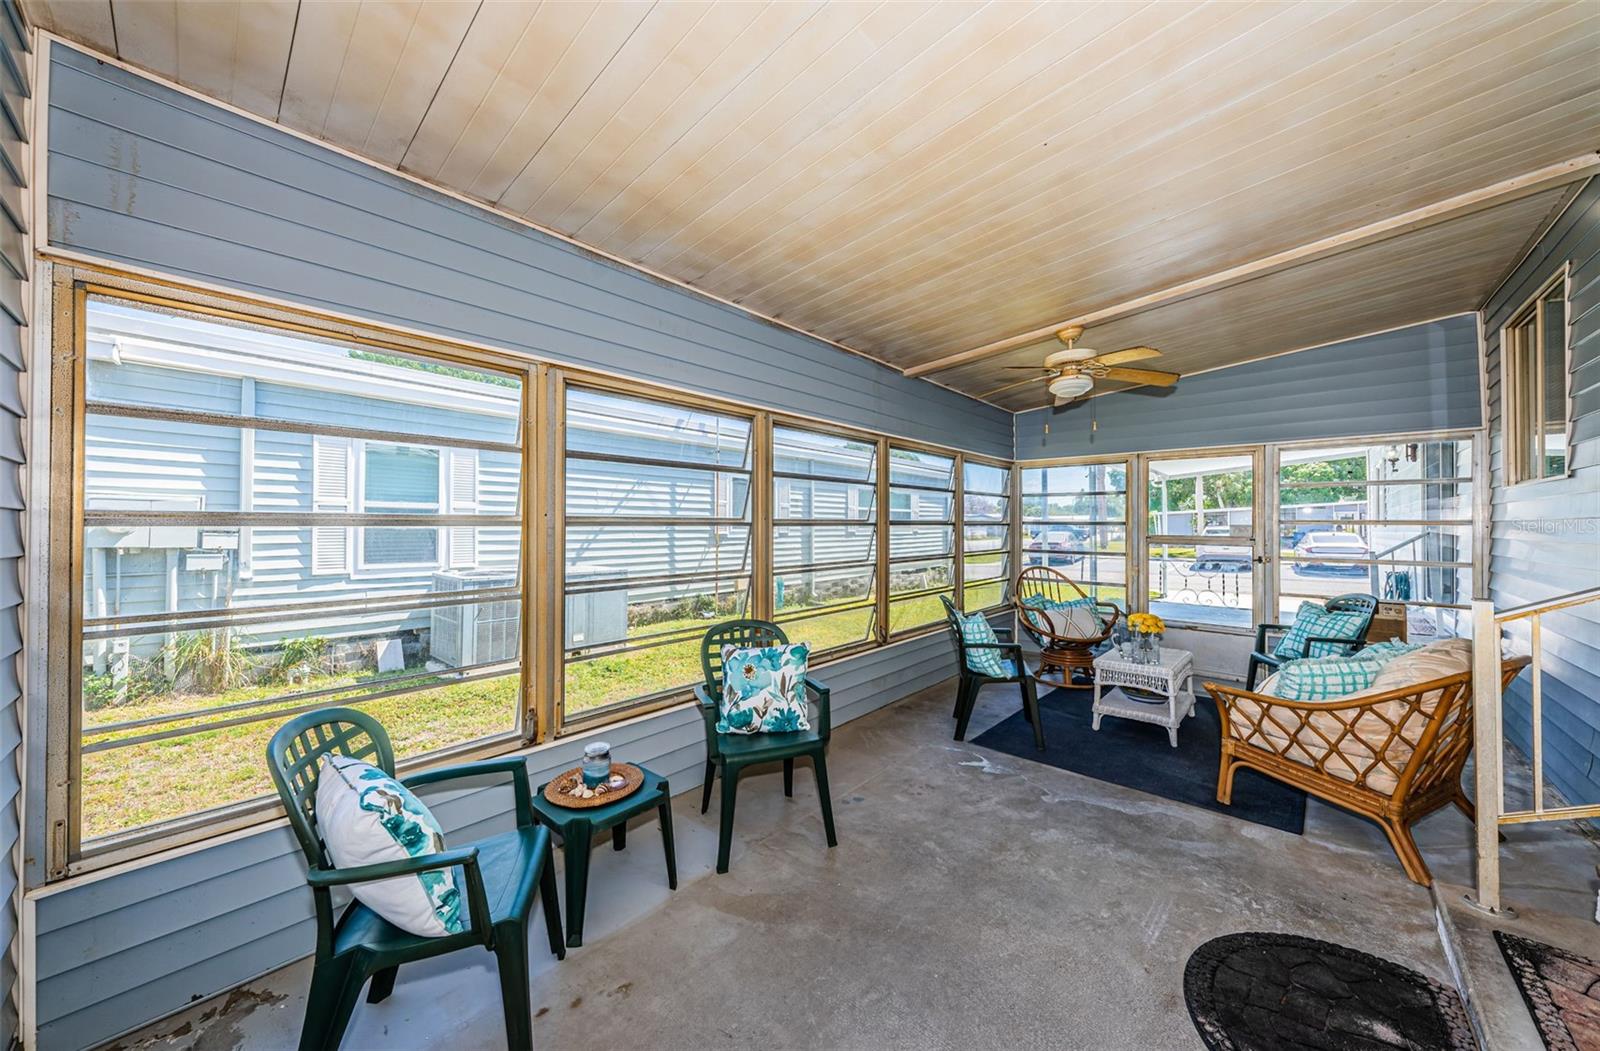 Screened in side porch with plenty of space